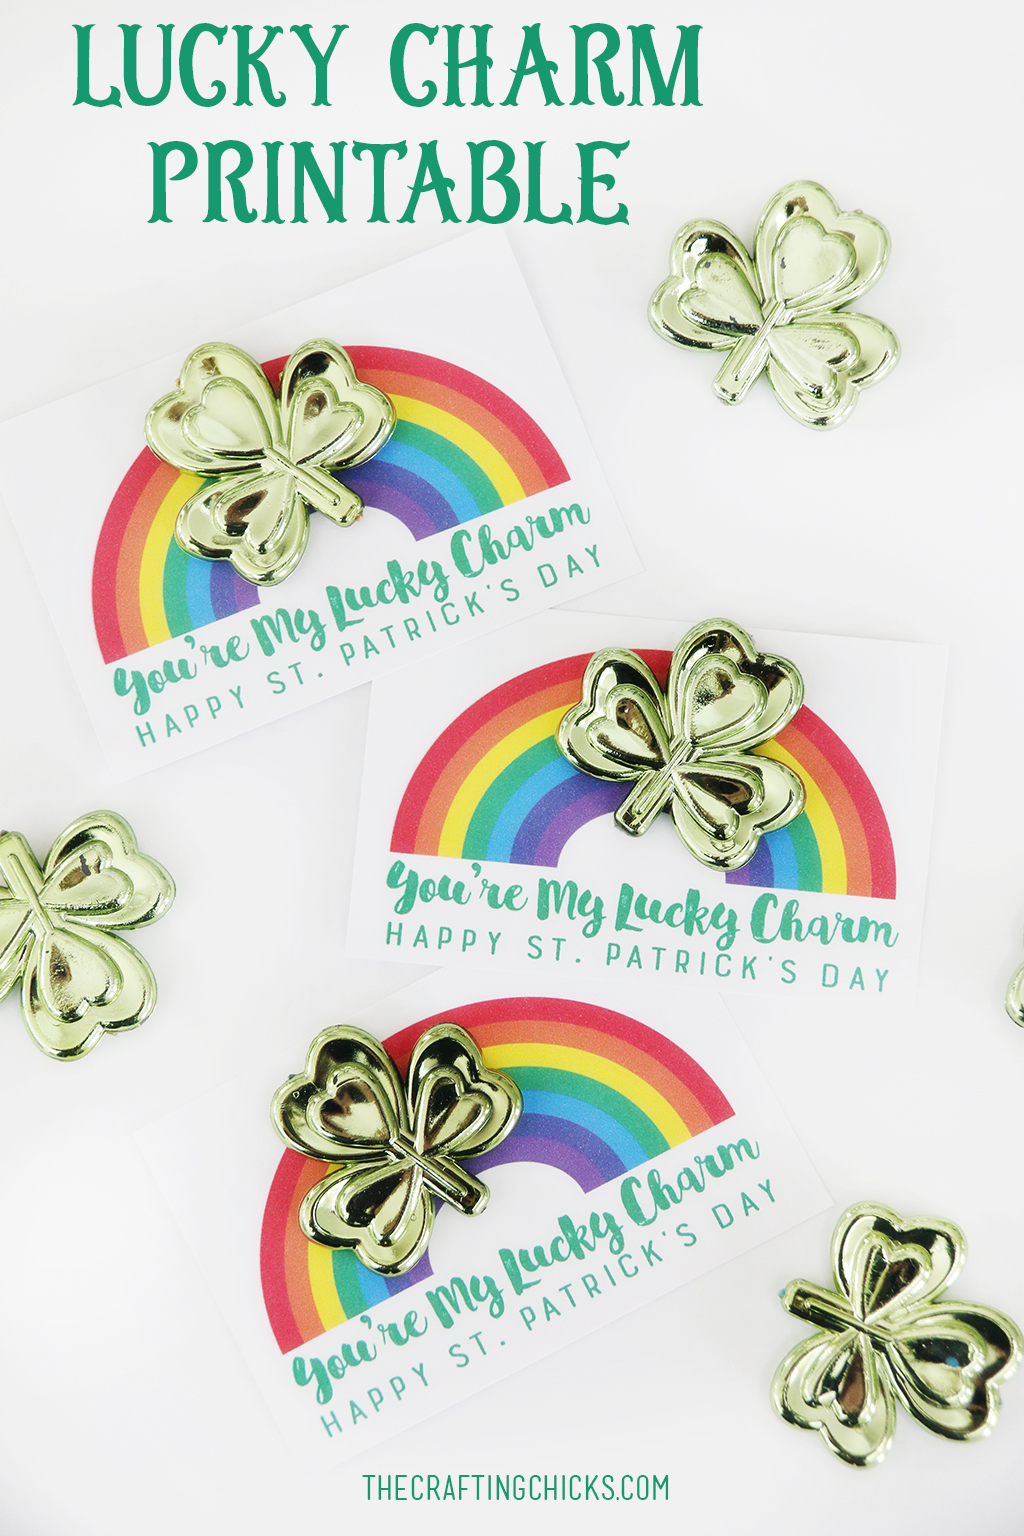 Rainbow printable with "You're my lucky Charm. Happy St. Patrick's Day." on it with shiny green clovers.